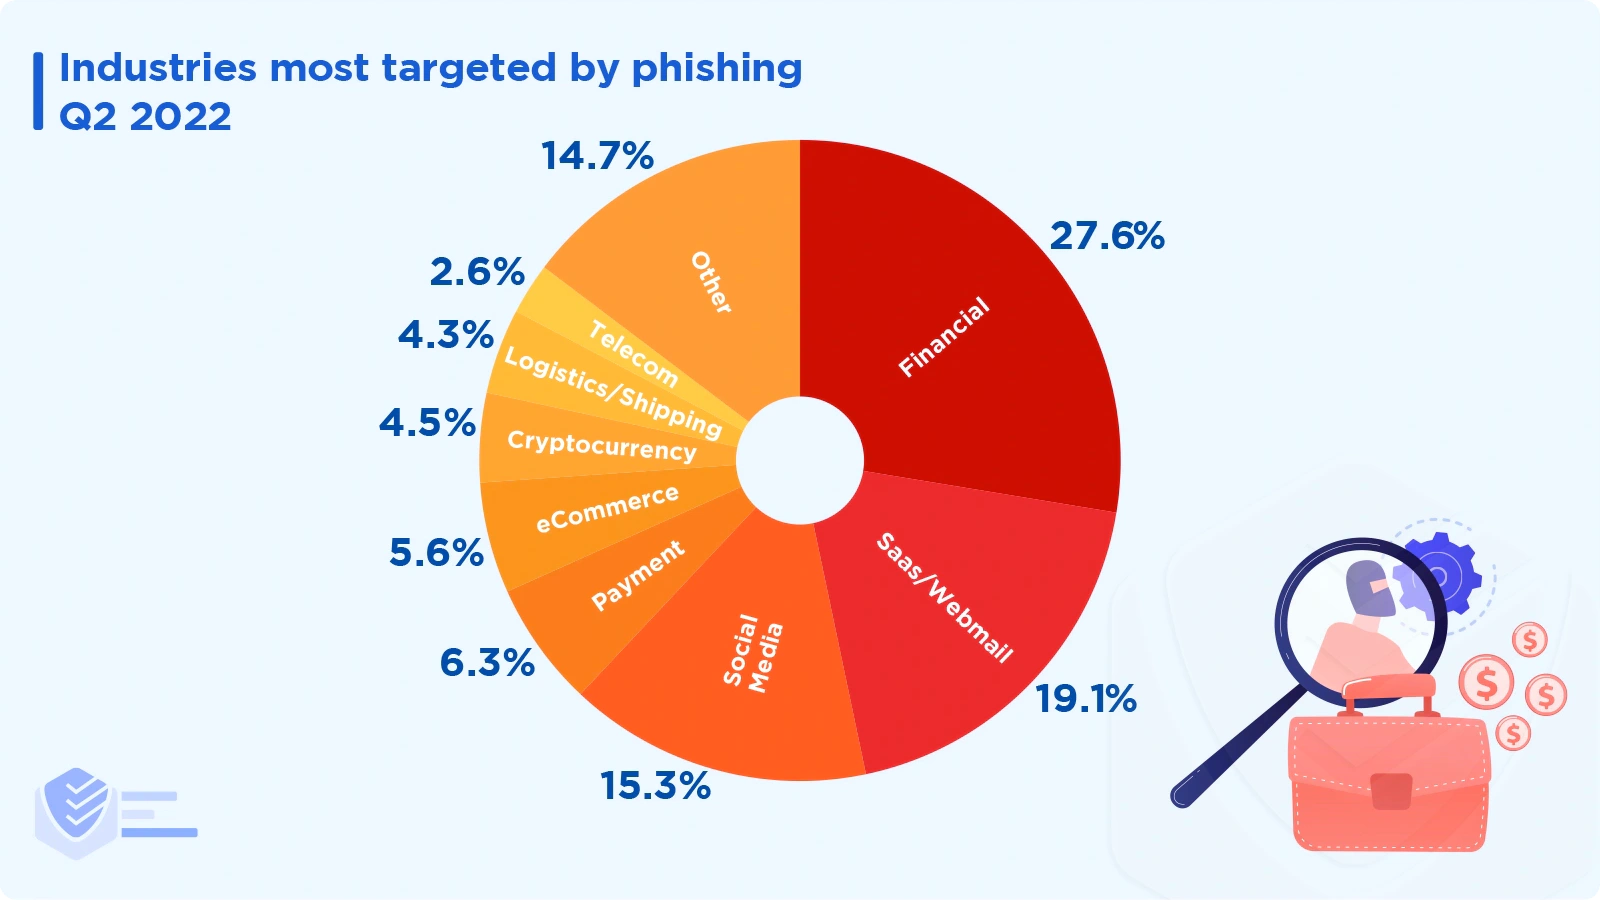 Industries most targeted by phishing Q2 2022